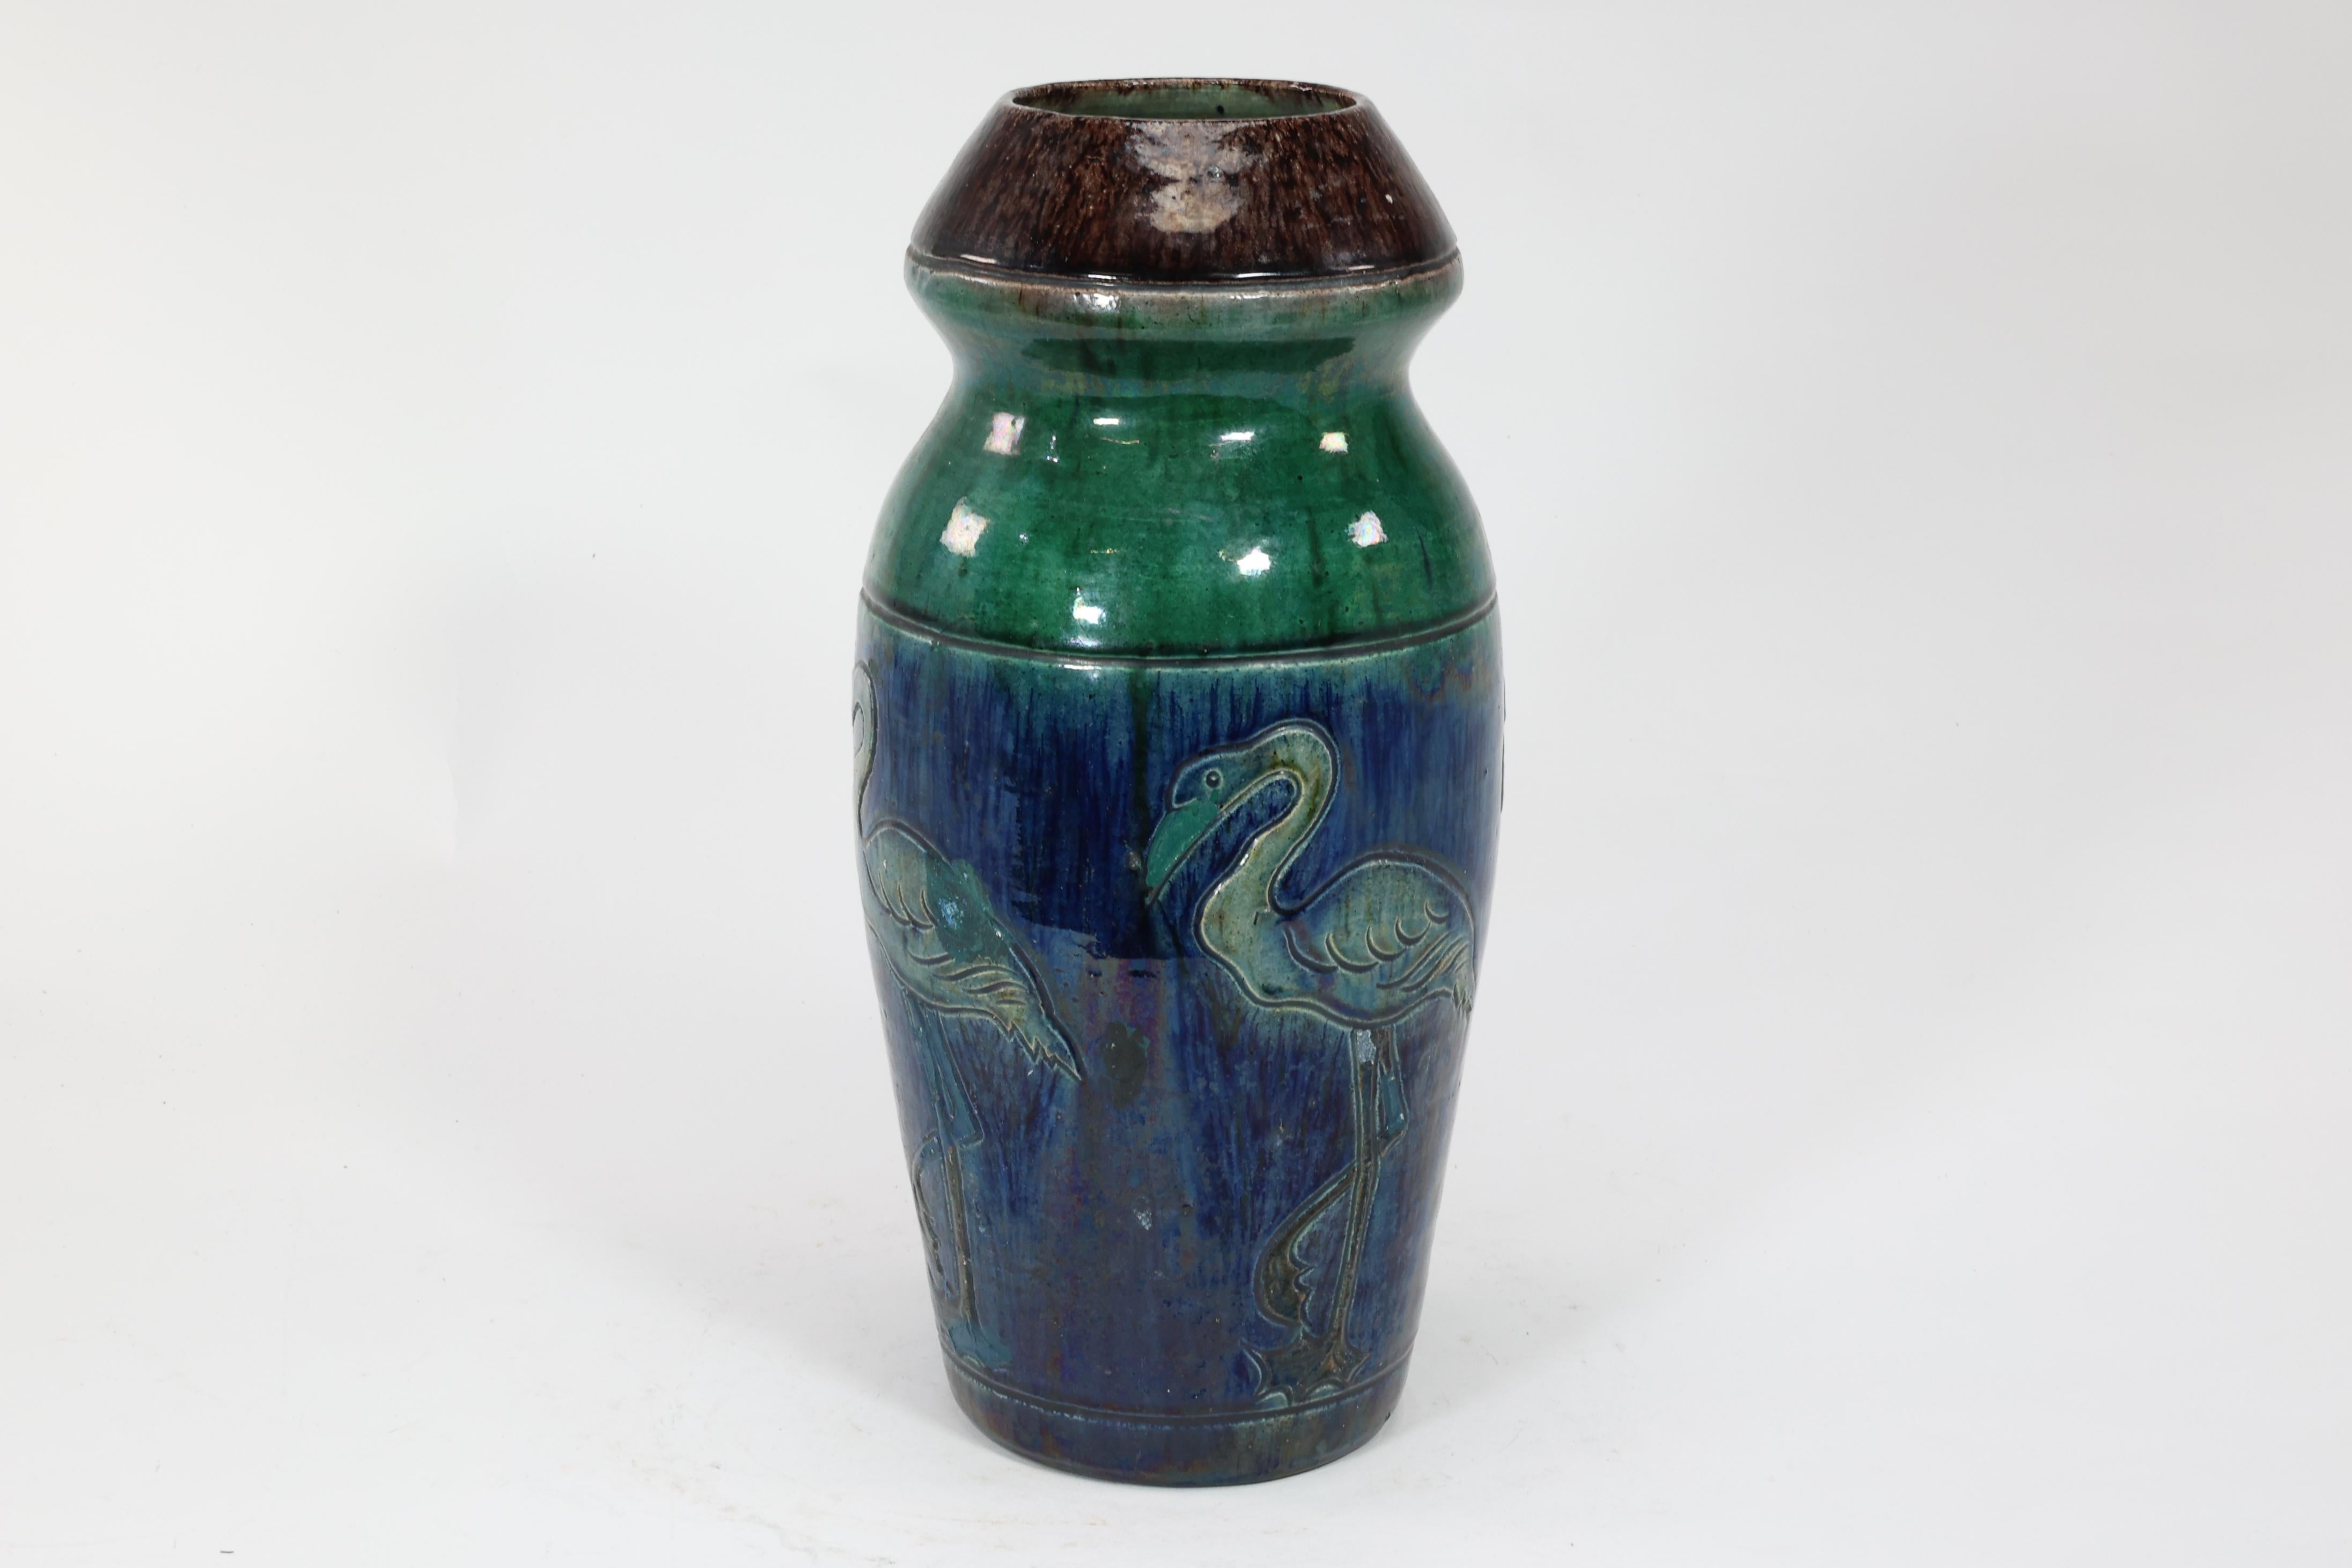 Belgium Art Pottery. A tall ceramic Arts and Crafts vase decorated with five flamingoes set in mottled green and blue glaze.